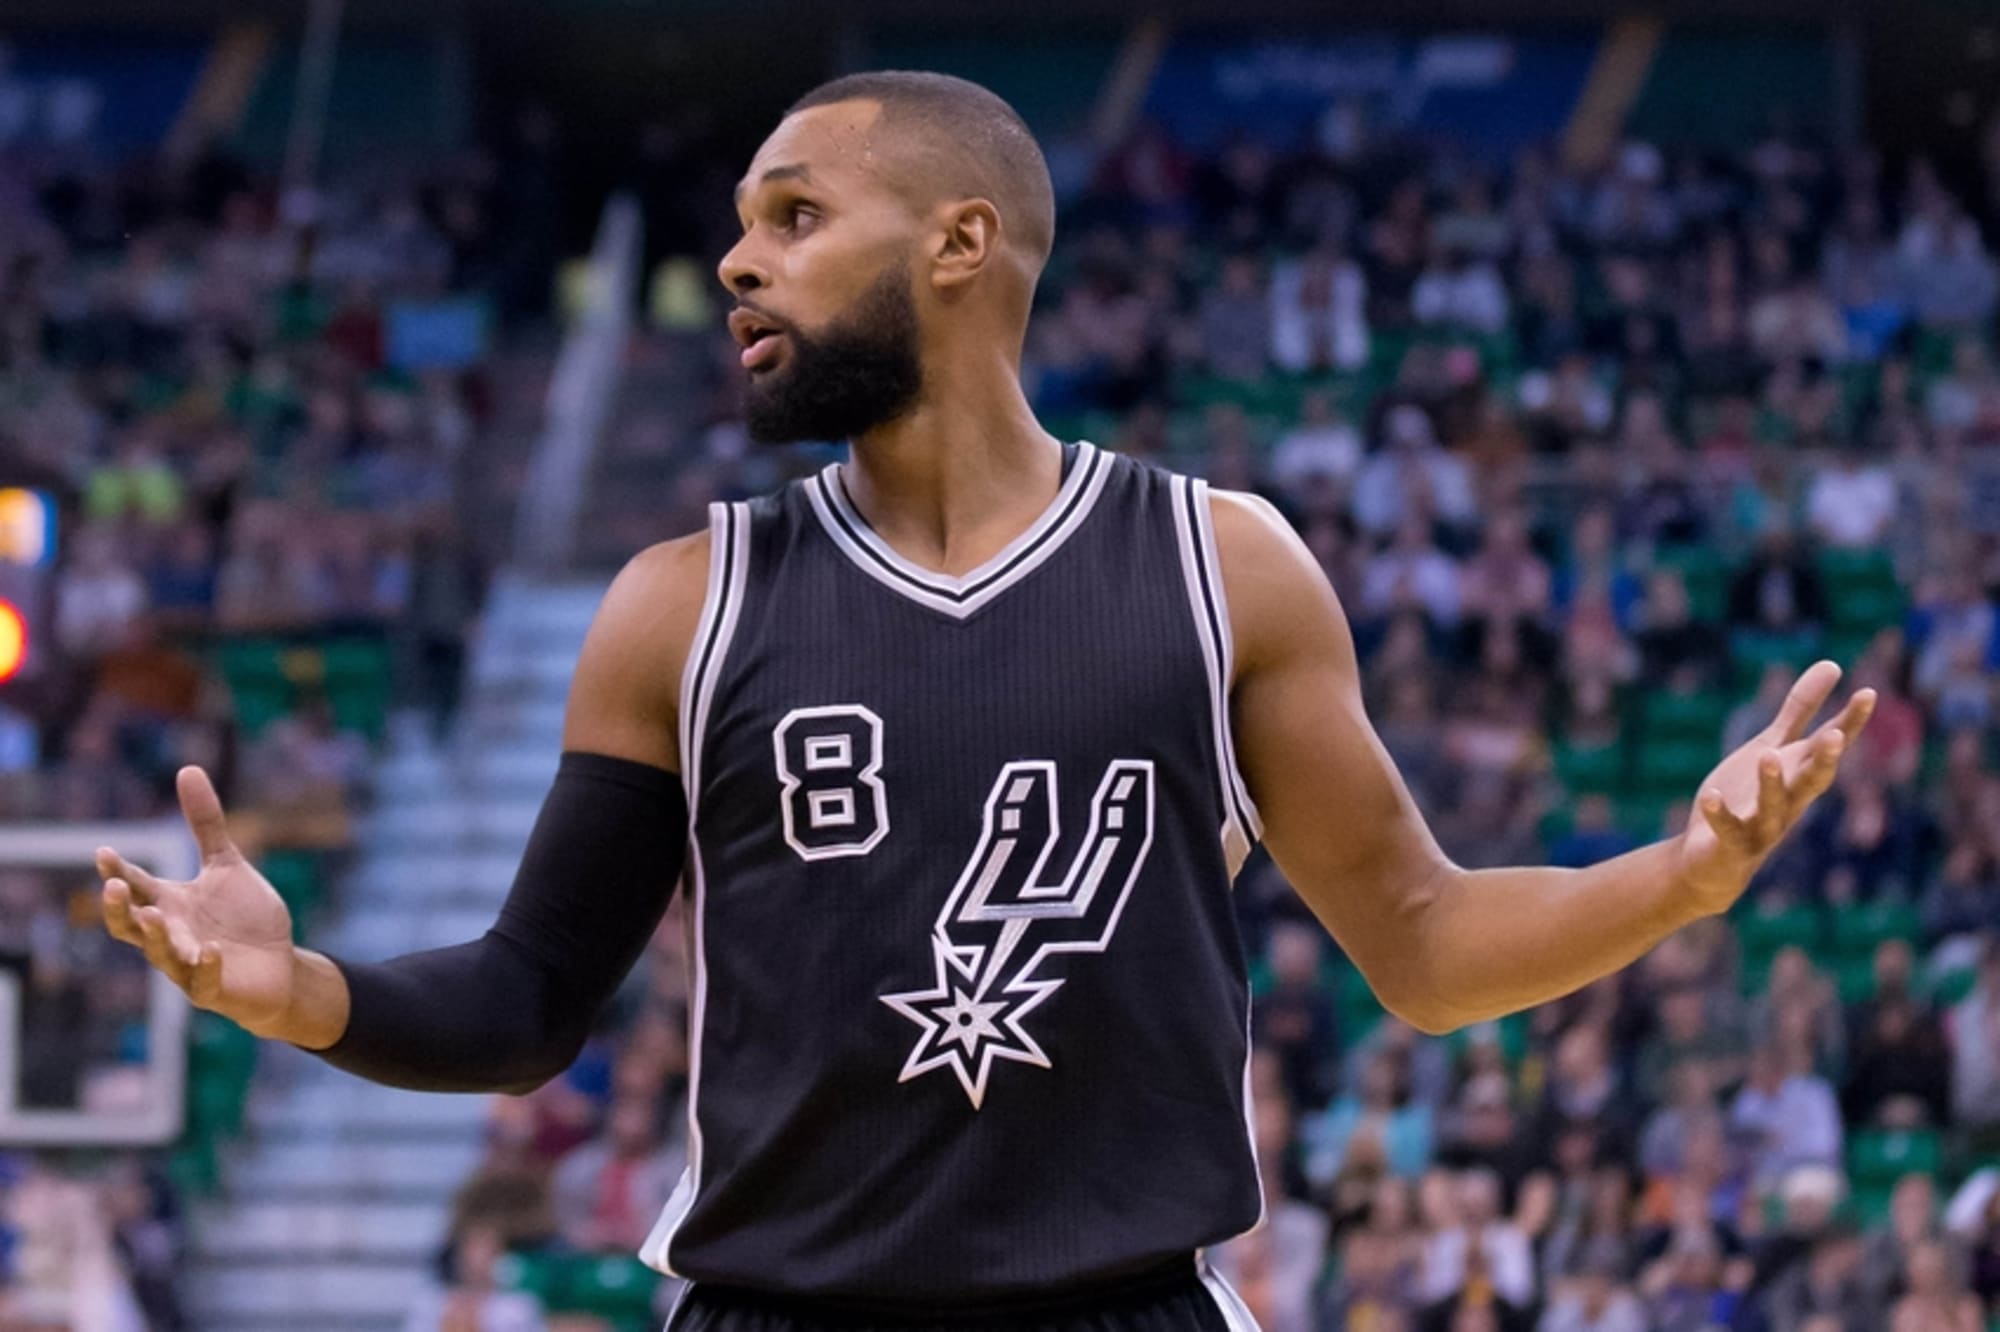 How Tall is Patty Mills?